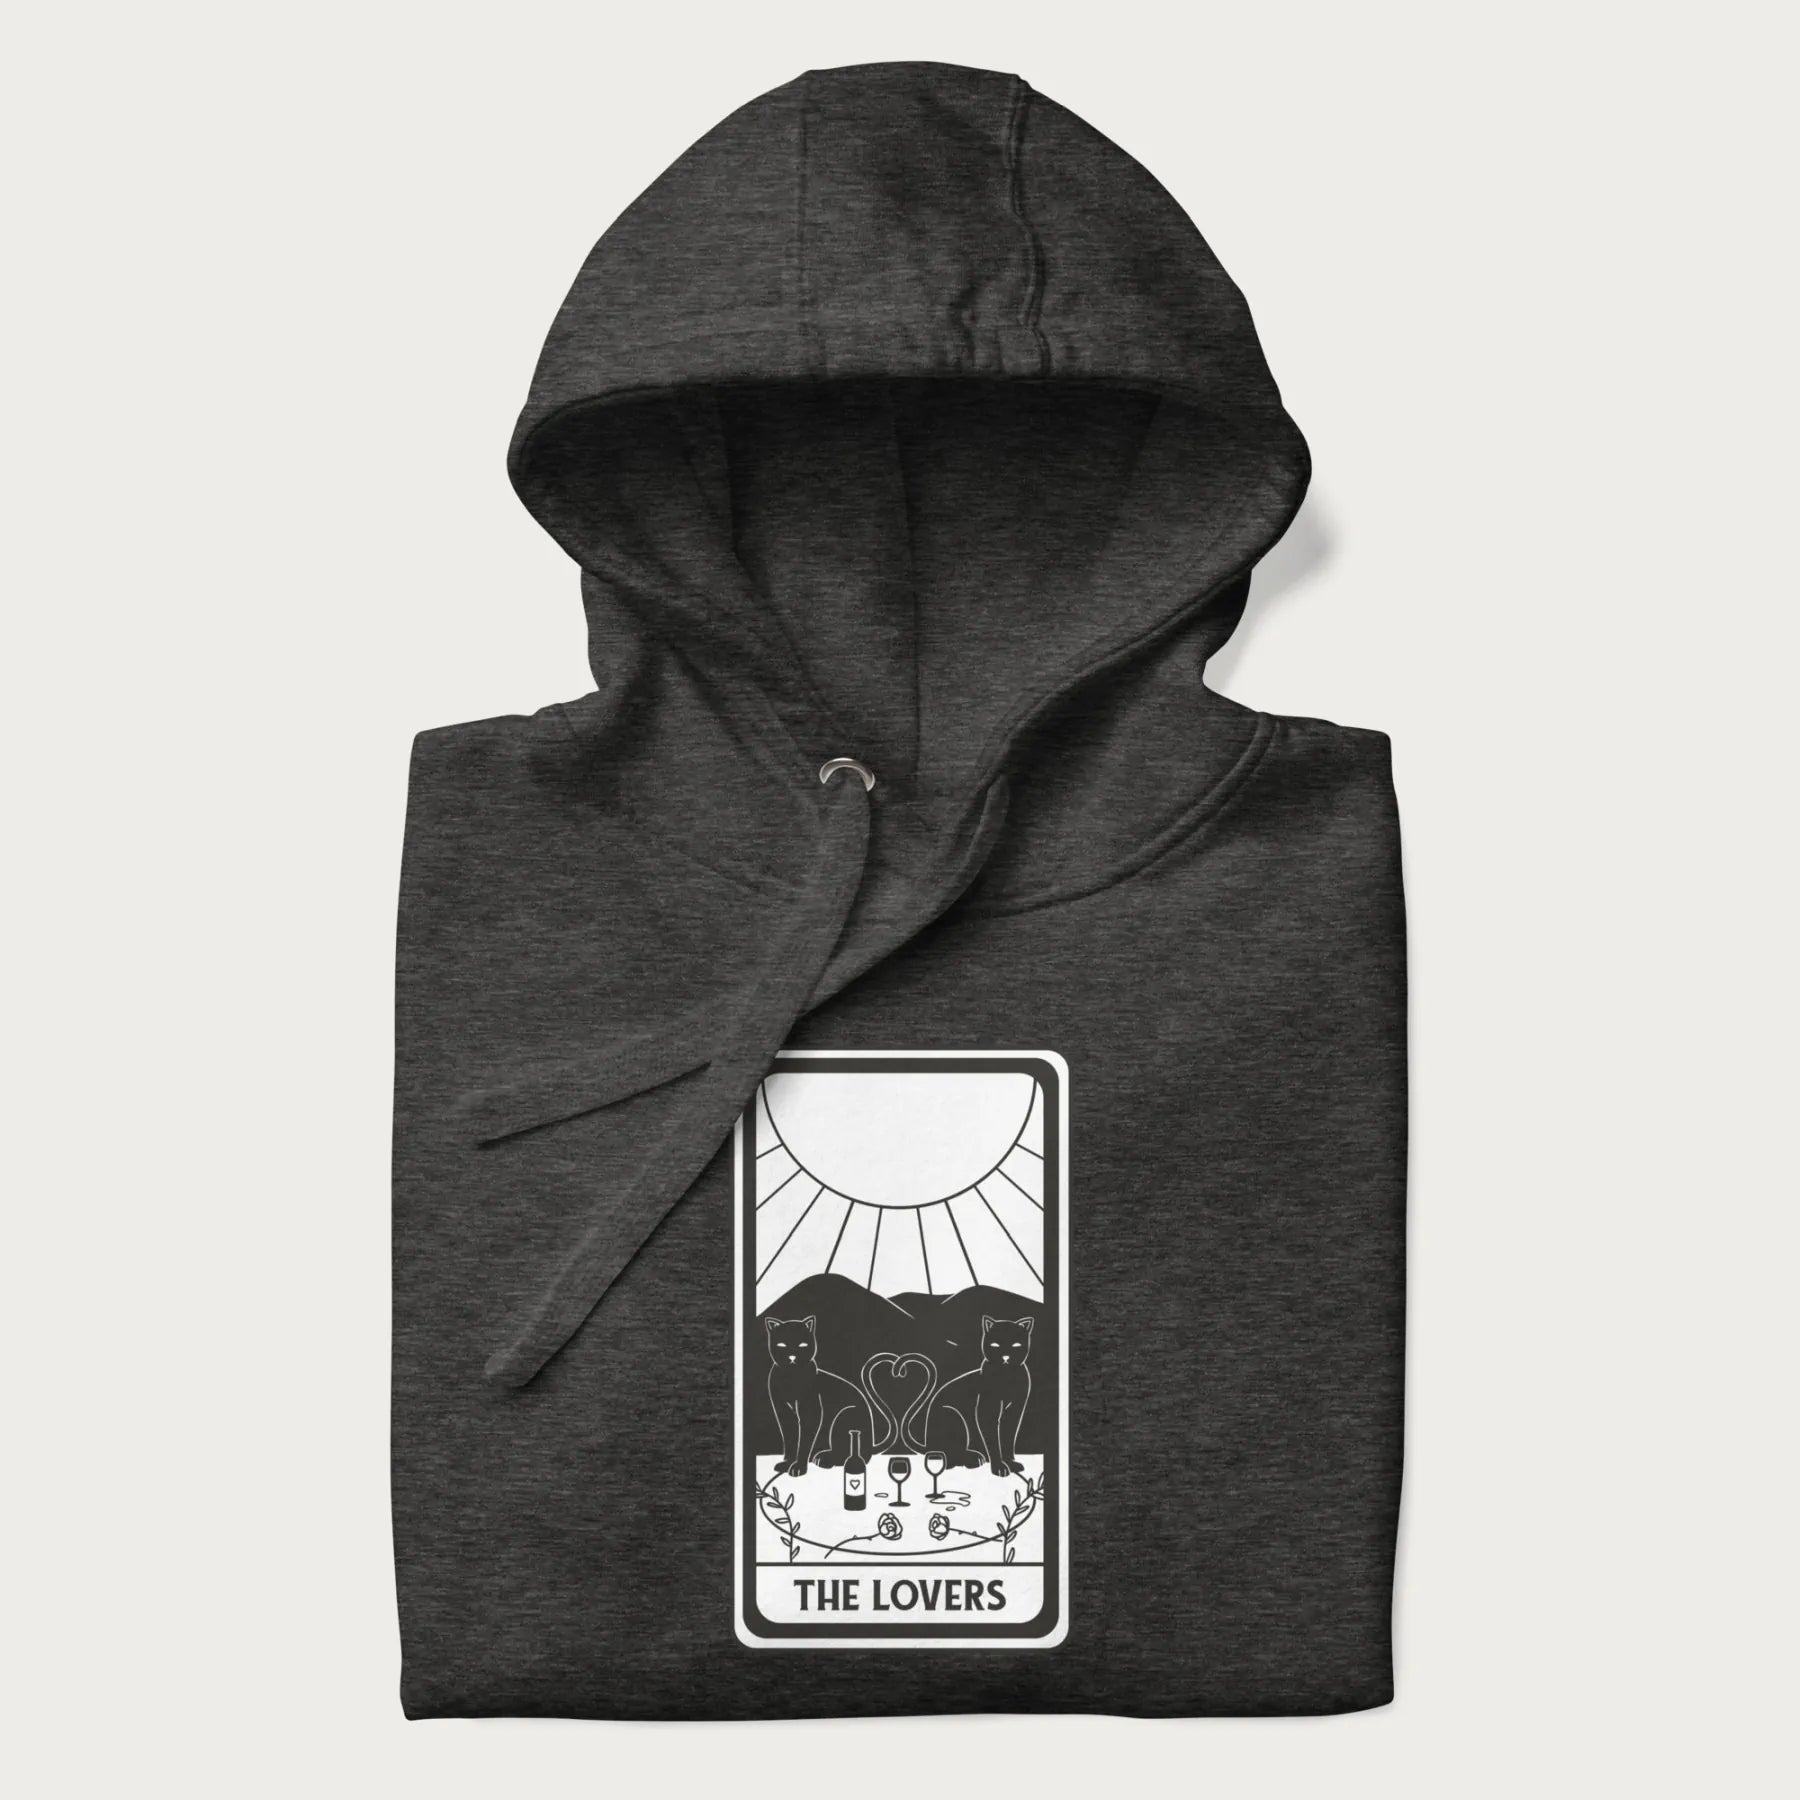 Folded dark grey hoodie with a 'The Lovers' tarot card graphic of two cats with intertwined tails forming a heart, wine, and roses.